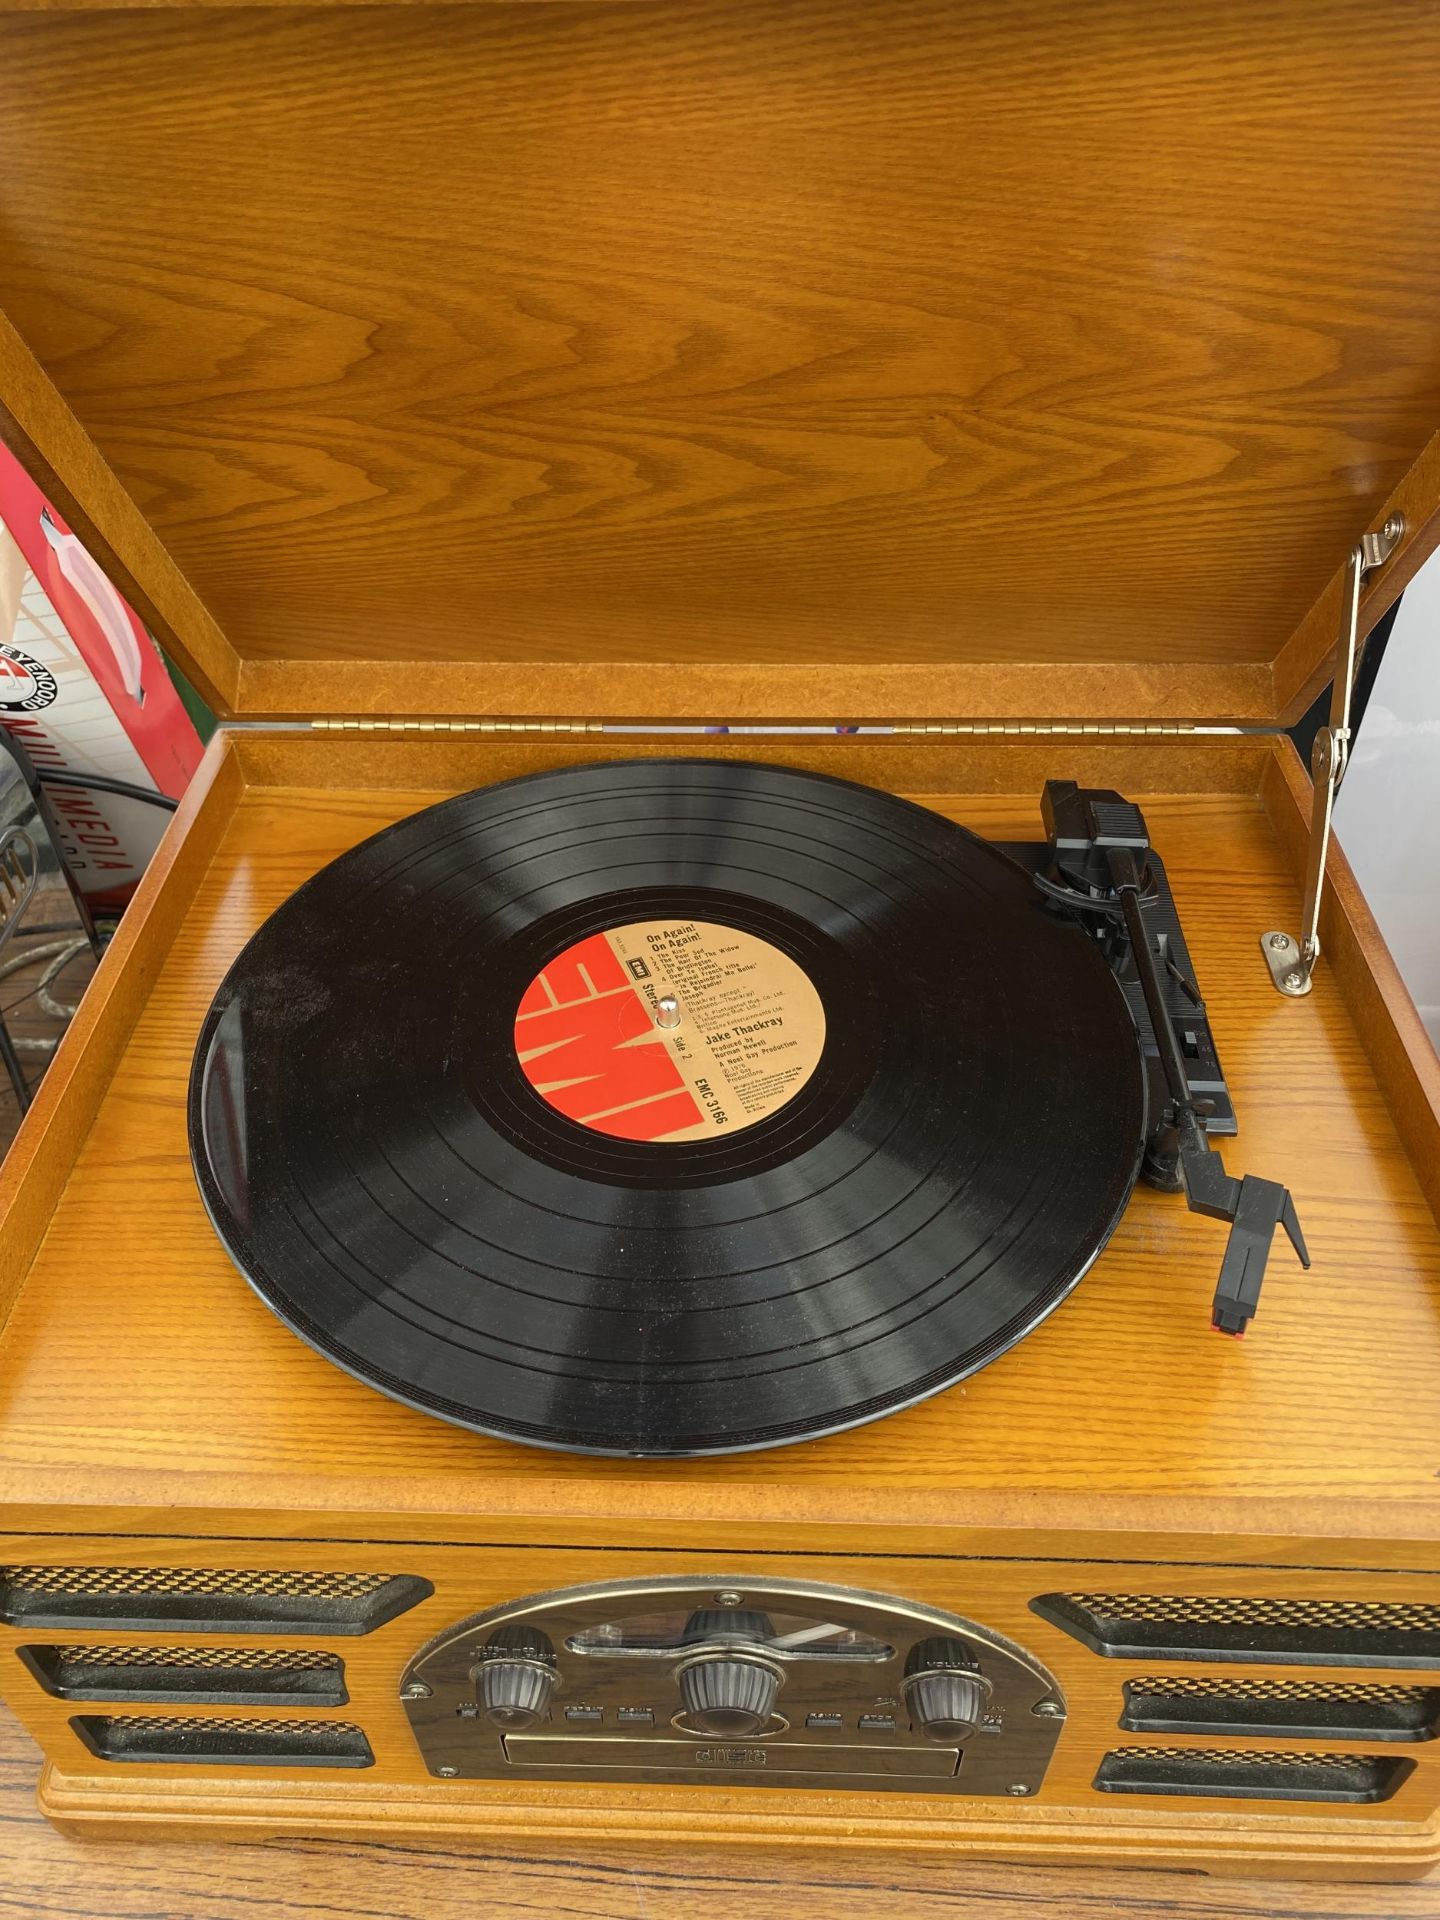 A CROSLEY RECORD PLAYER WITH WOODEN CASING - Image 4 of 4